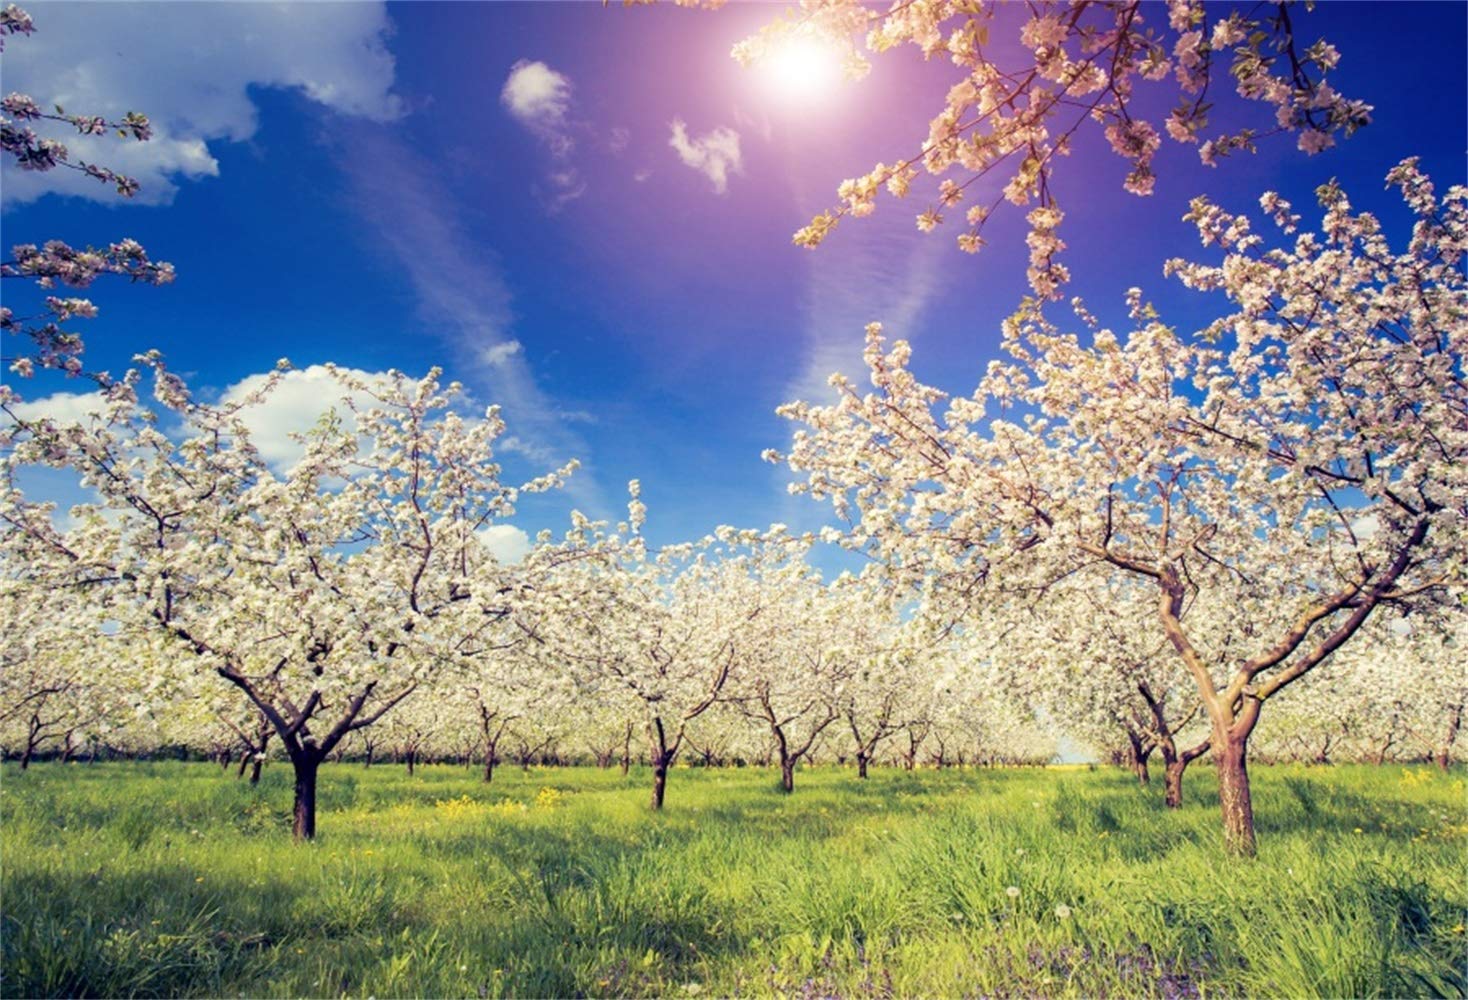 Amazon.com, Laeacco Spring Outdoor Blooming Trees Orchard Green Grassland Blue Sky White Clouds 7x5ft Vinyl Photography Background Spring Scenic Backdrop Landscape Wallpaper Wedding Shoot Studio Props